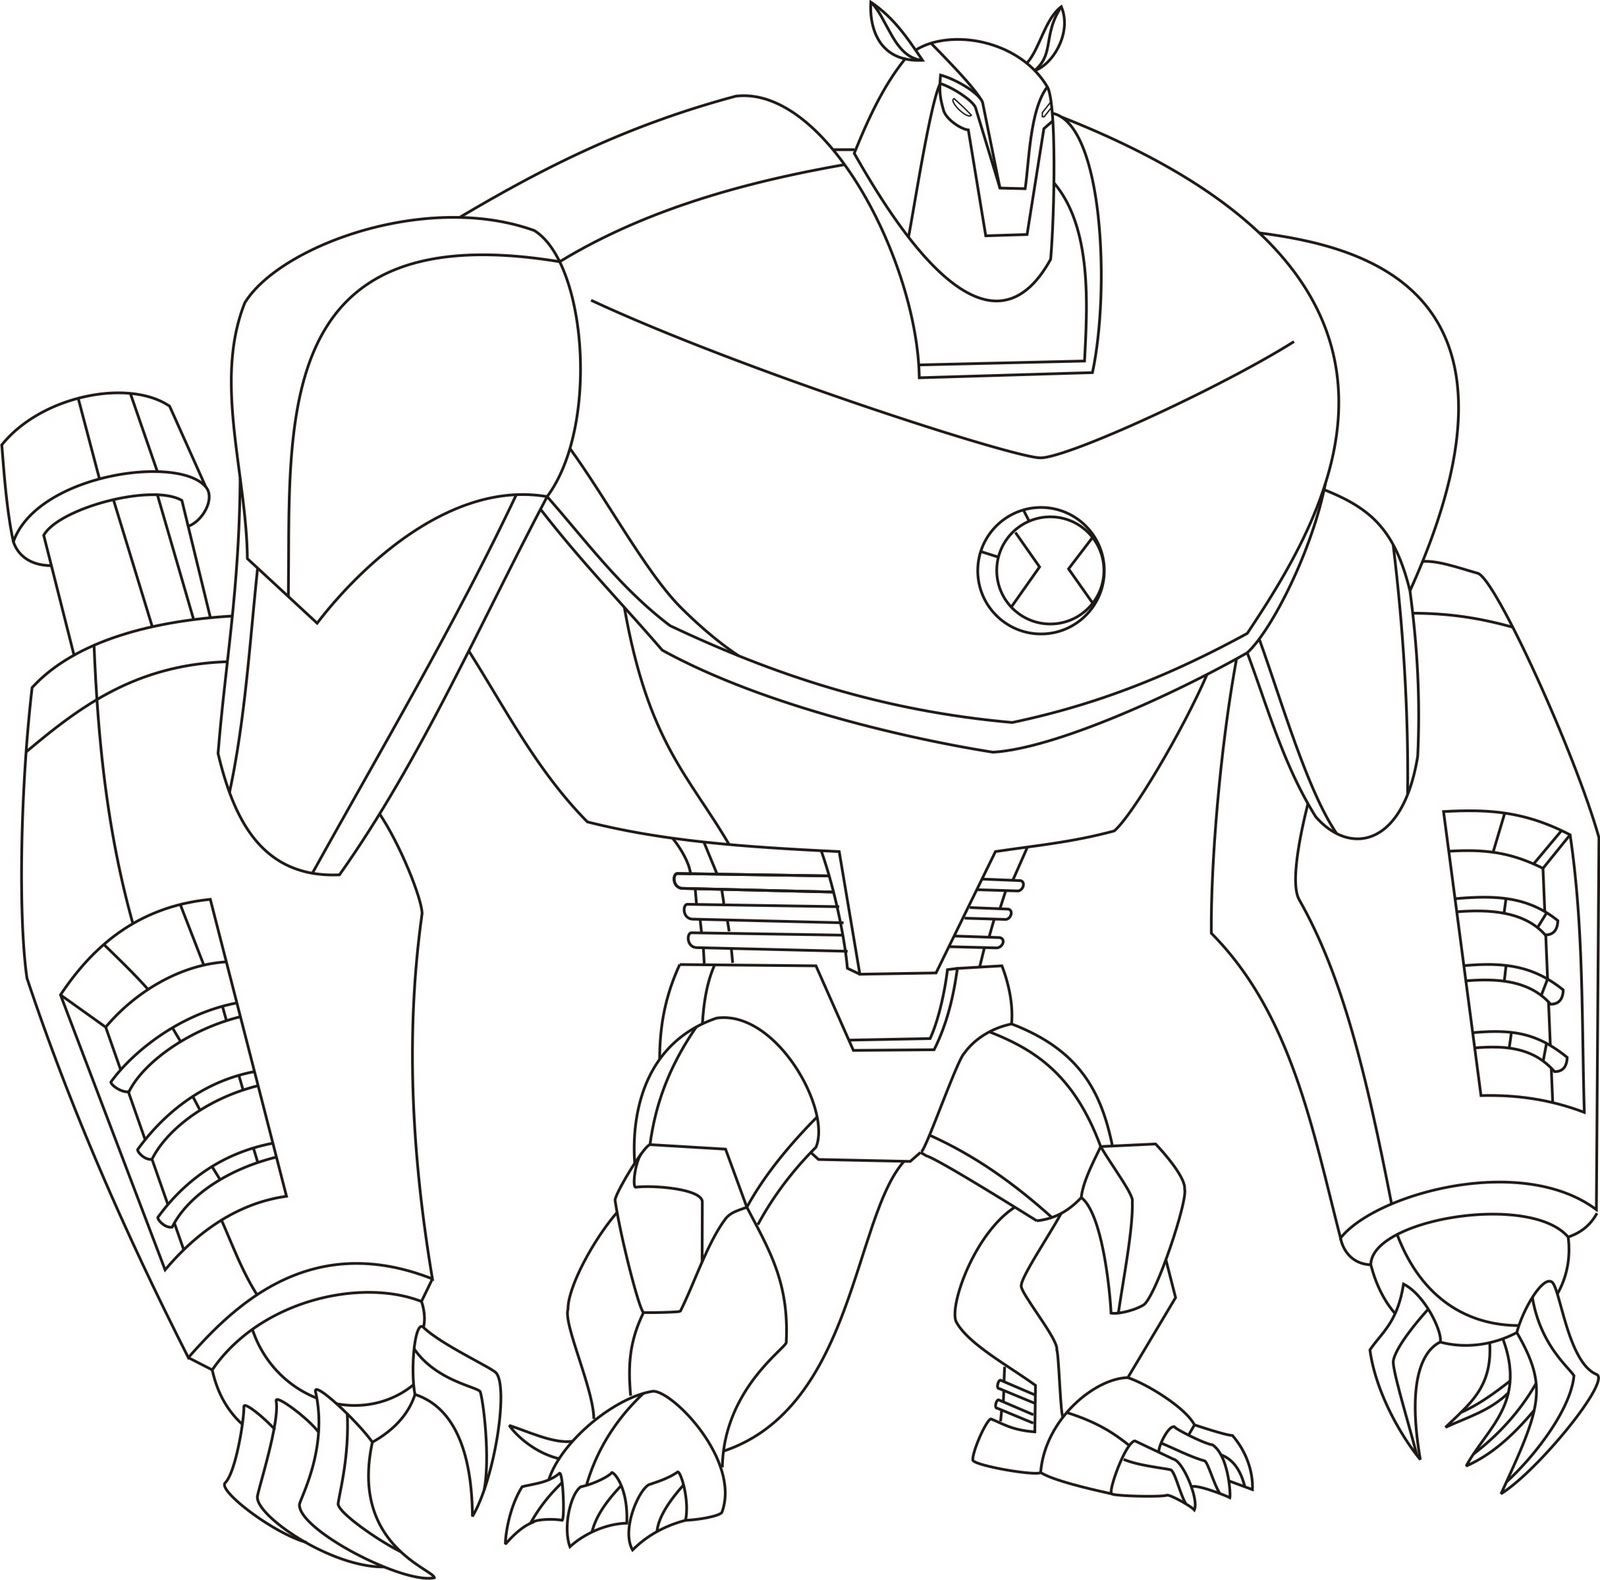 ben-10-ultimate-alien-coloring-pages-at-getcolorings-free-printable-colorings-pages-to